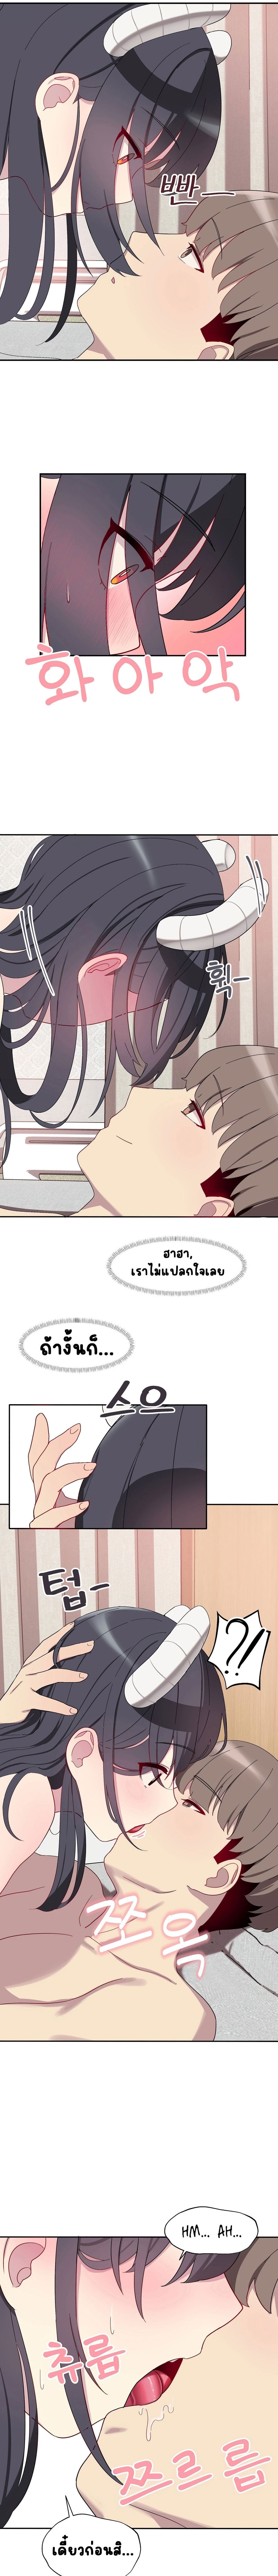 Hospitalized Life in Another World ตอนที่ 5 ภาพ 2